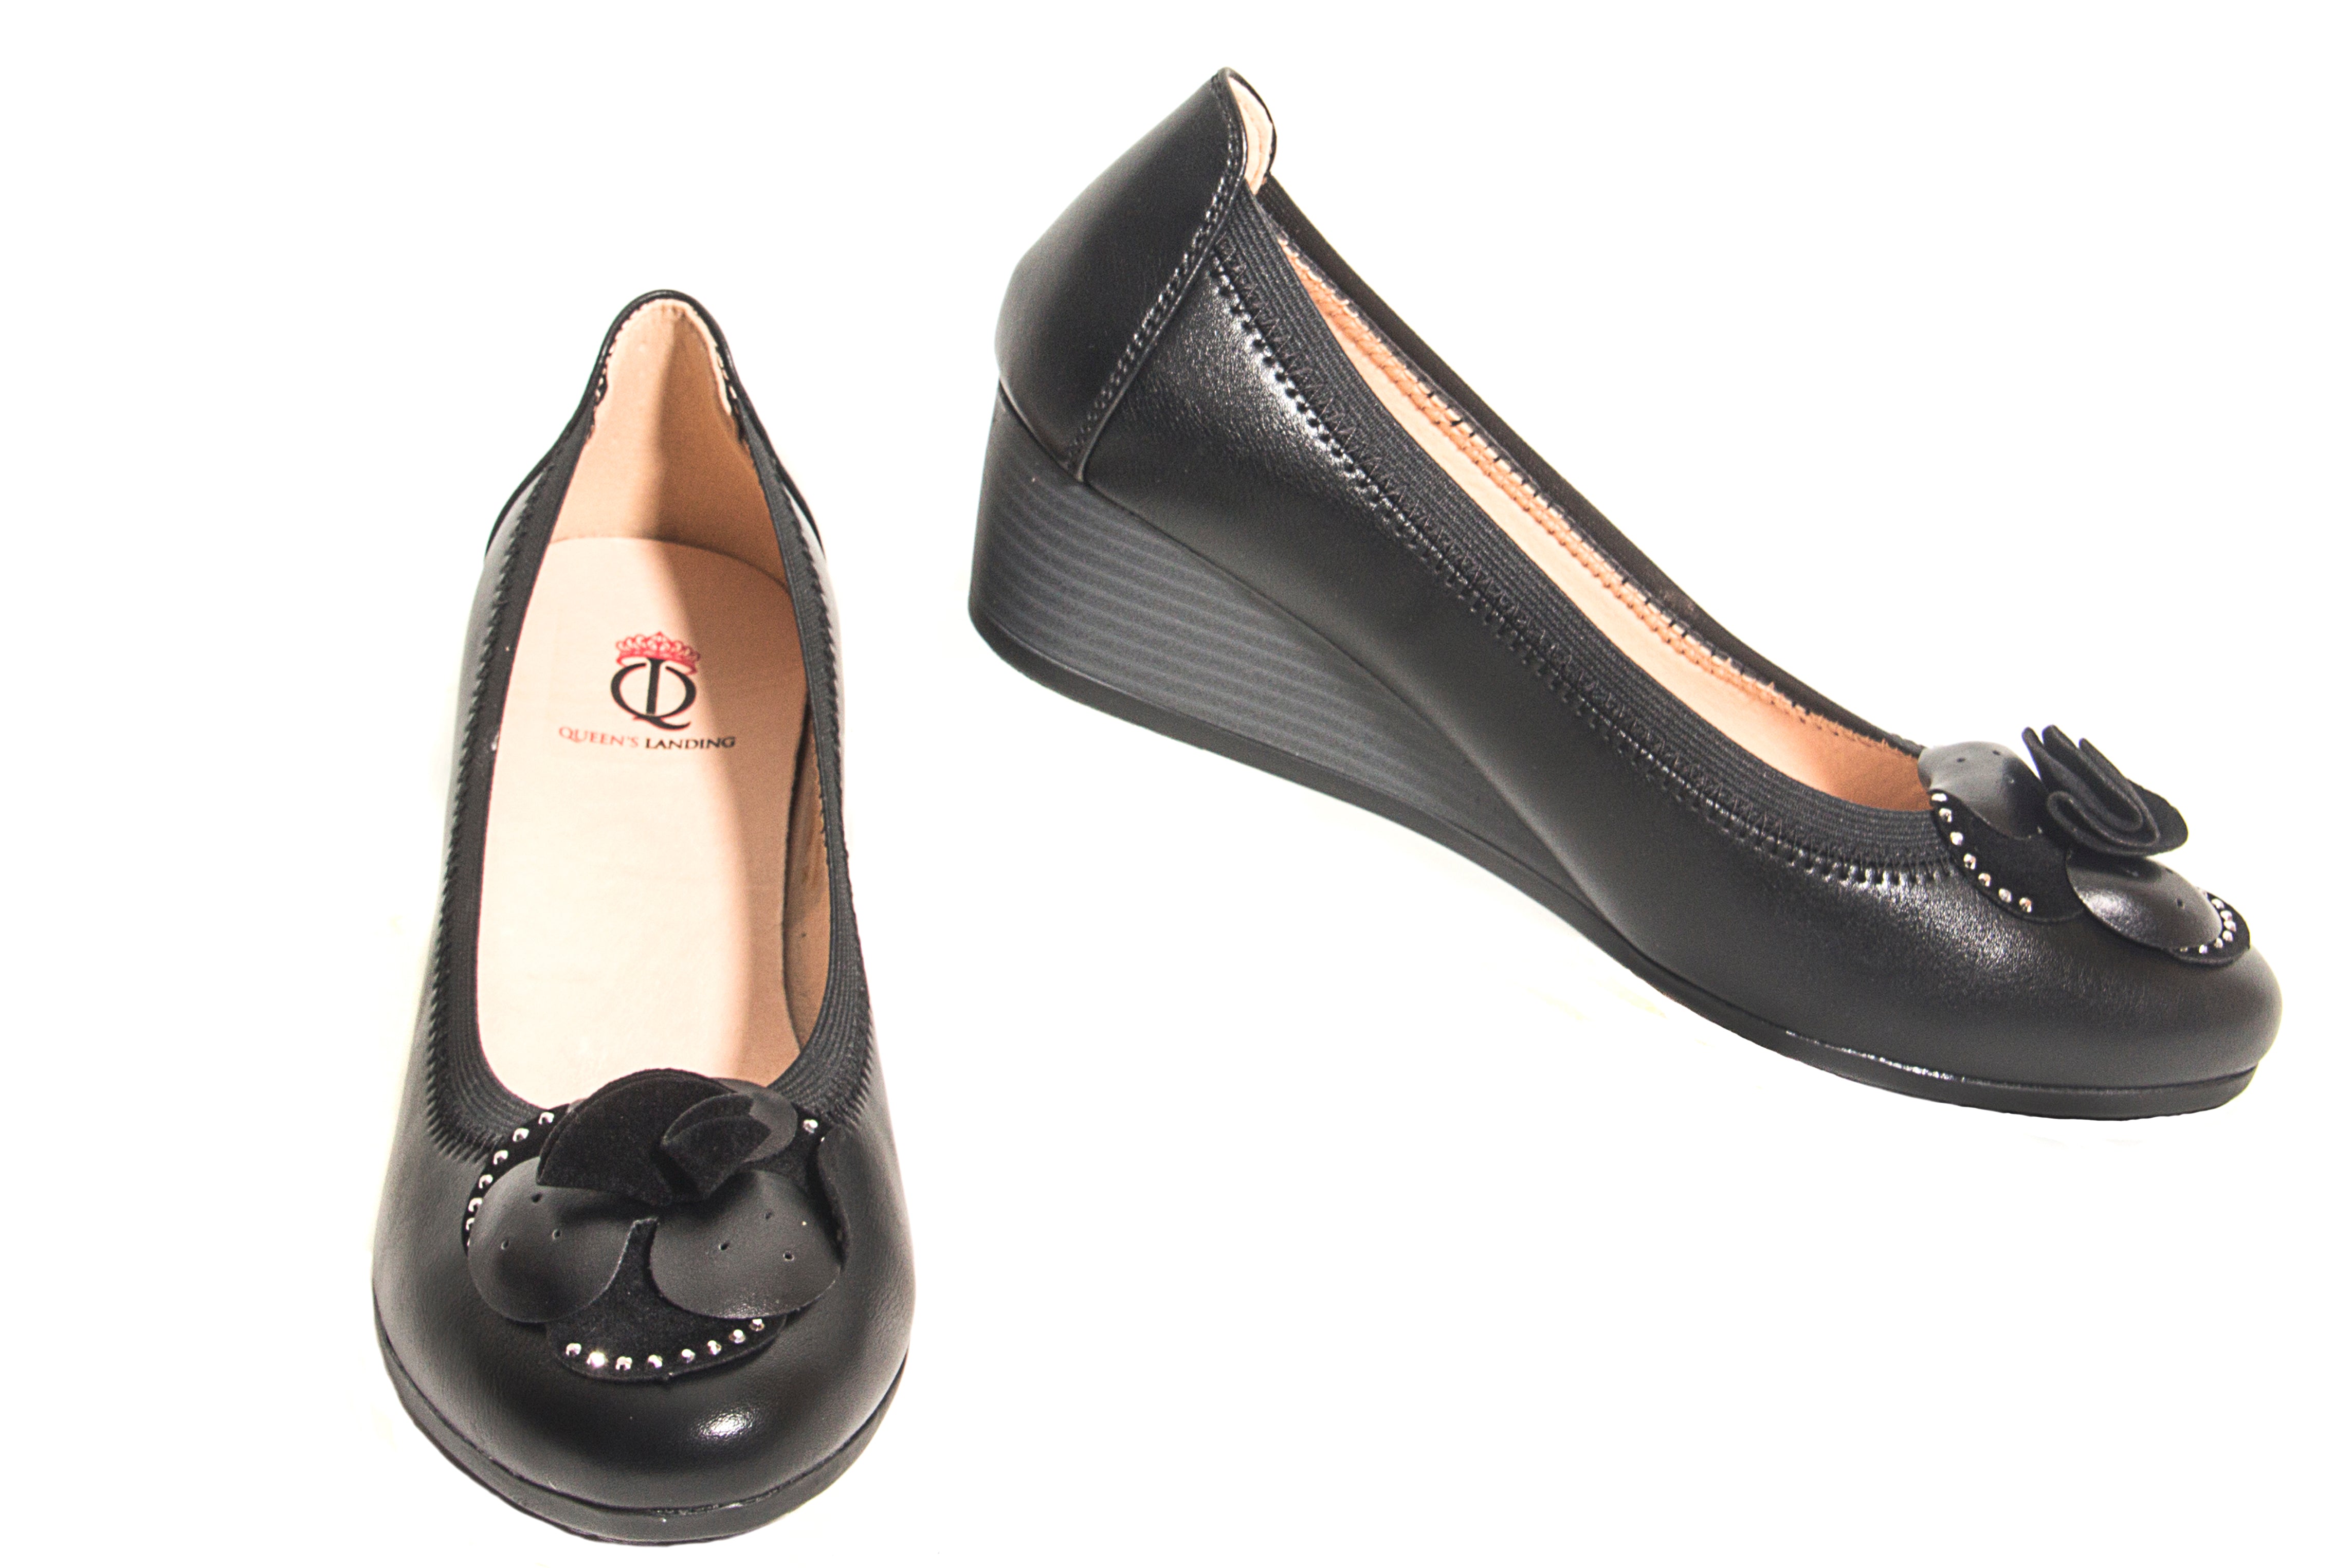 Soft and comfie leather Black color slip on wedge shoes with big sparkley flower center piece on the front